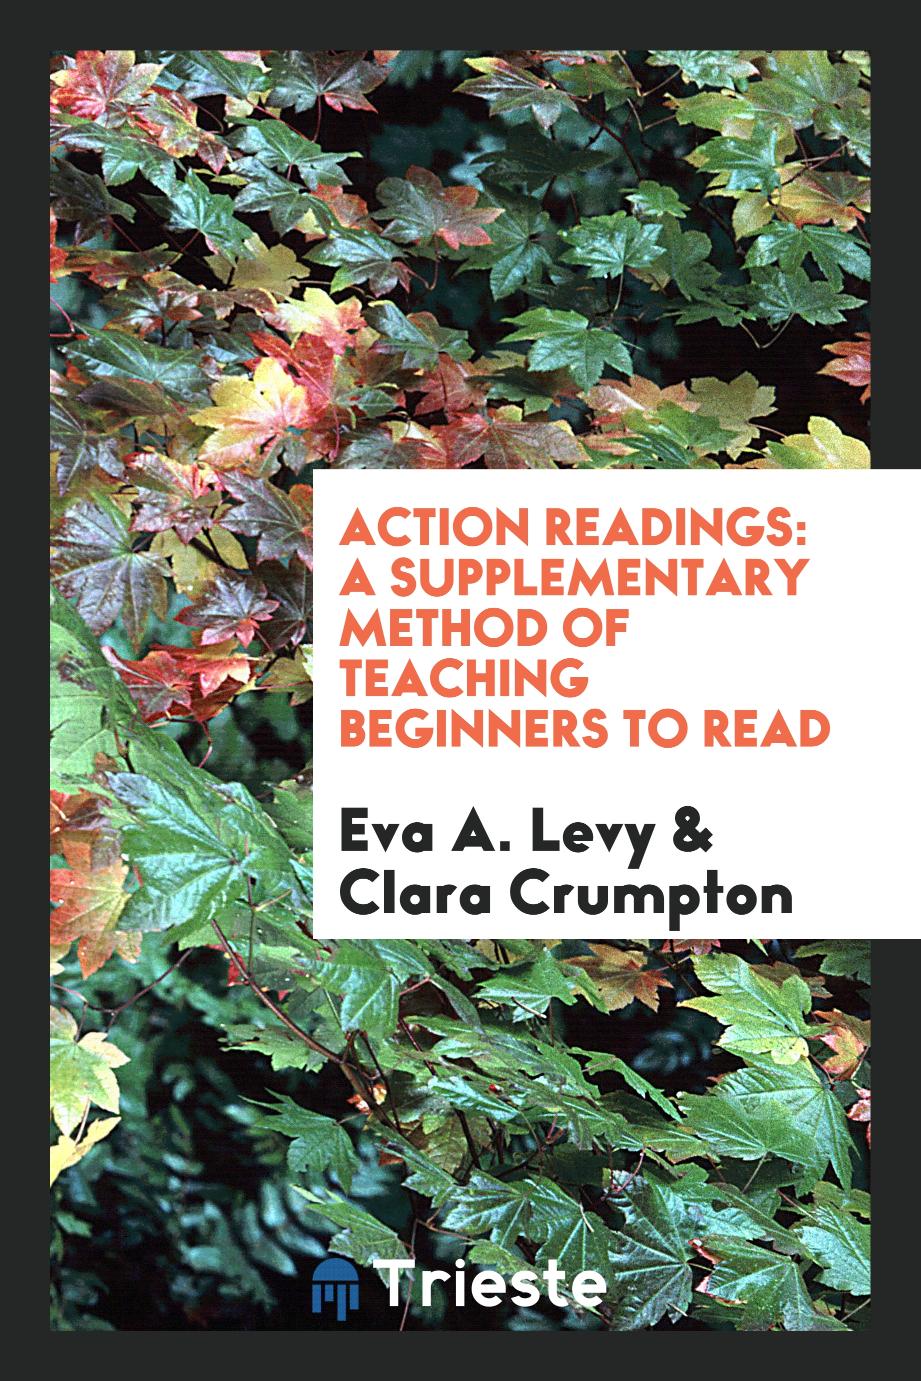 Action Readings: A Supplementary Method of Teaching Beginners to Read